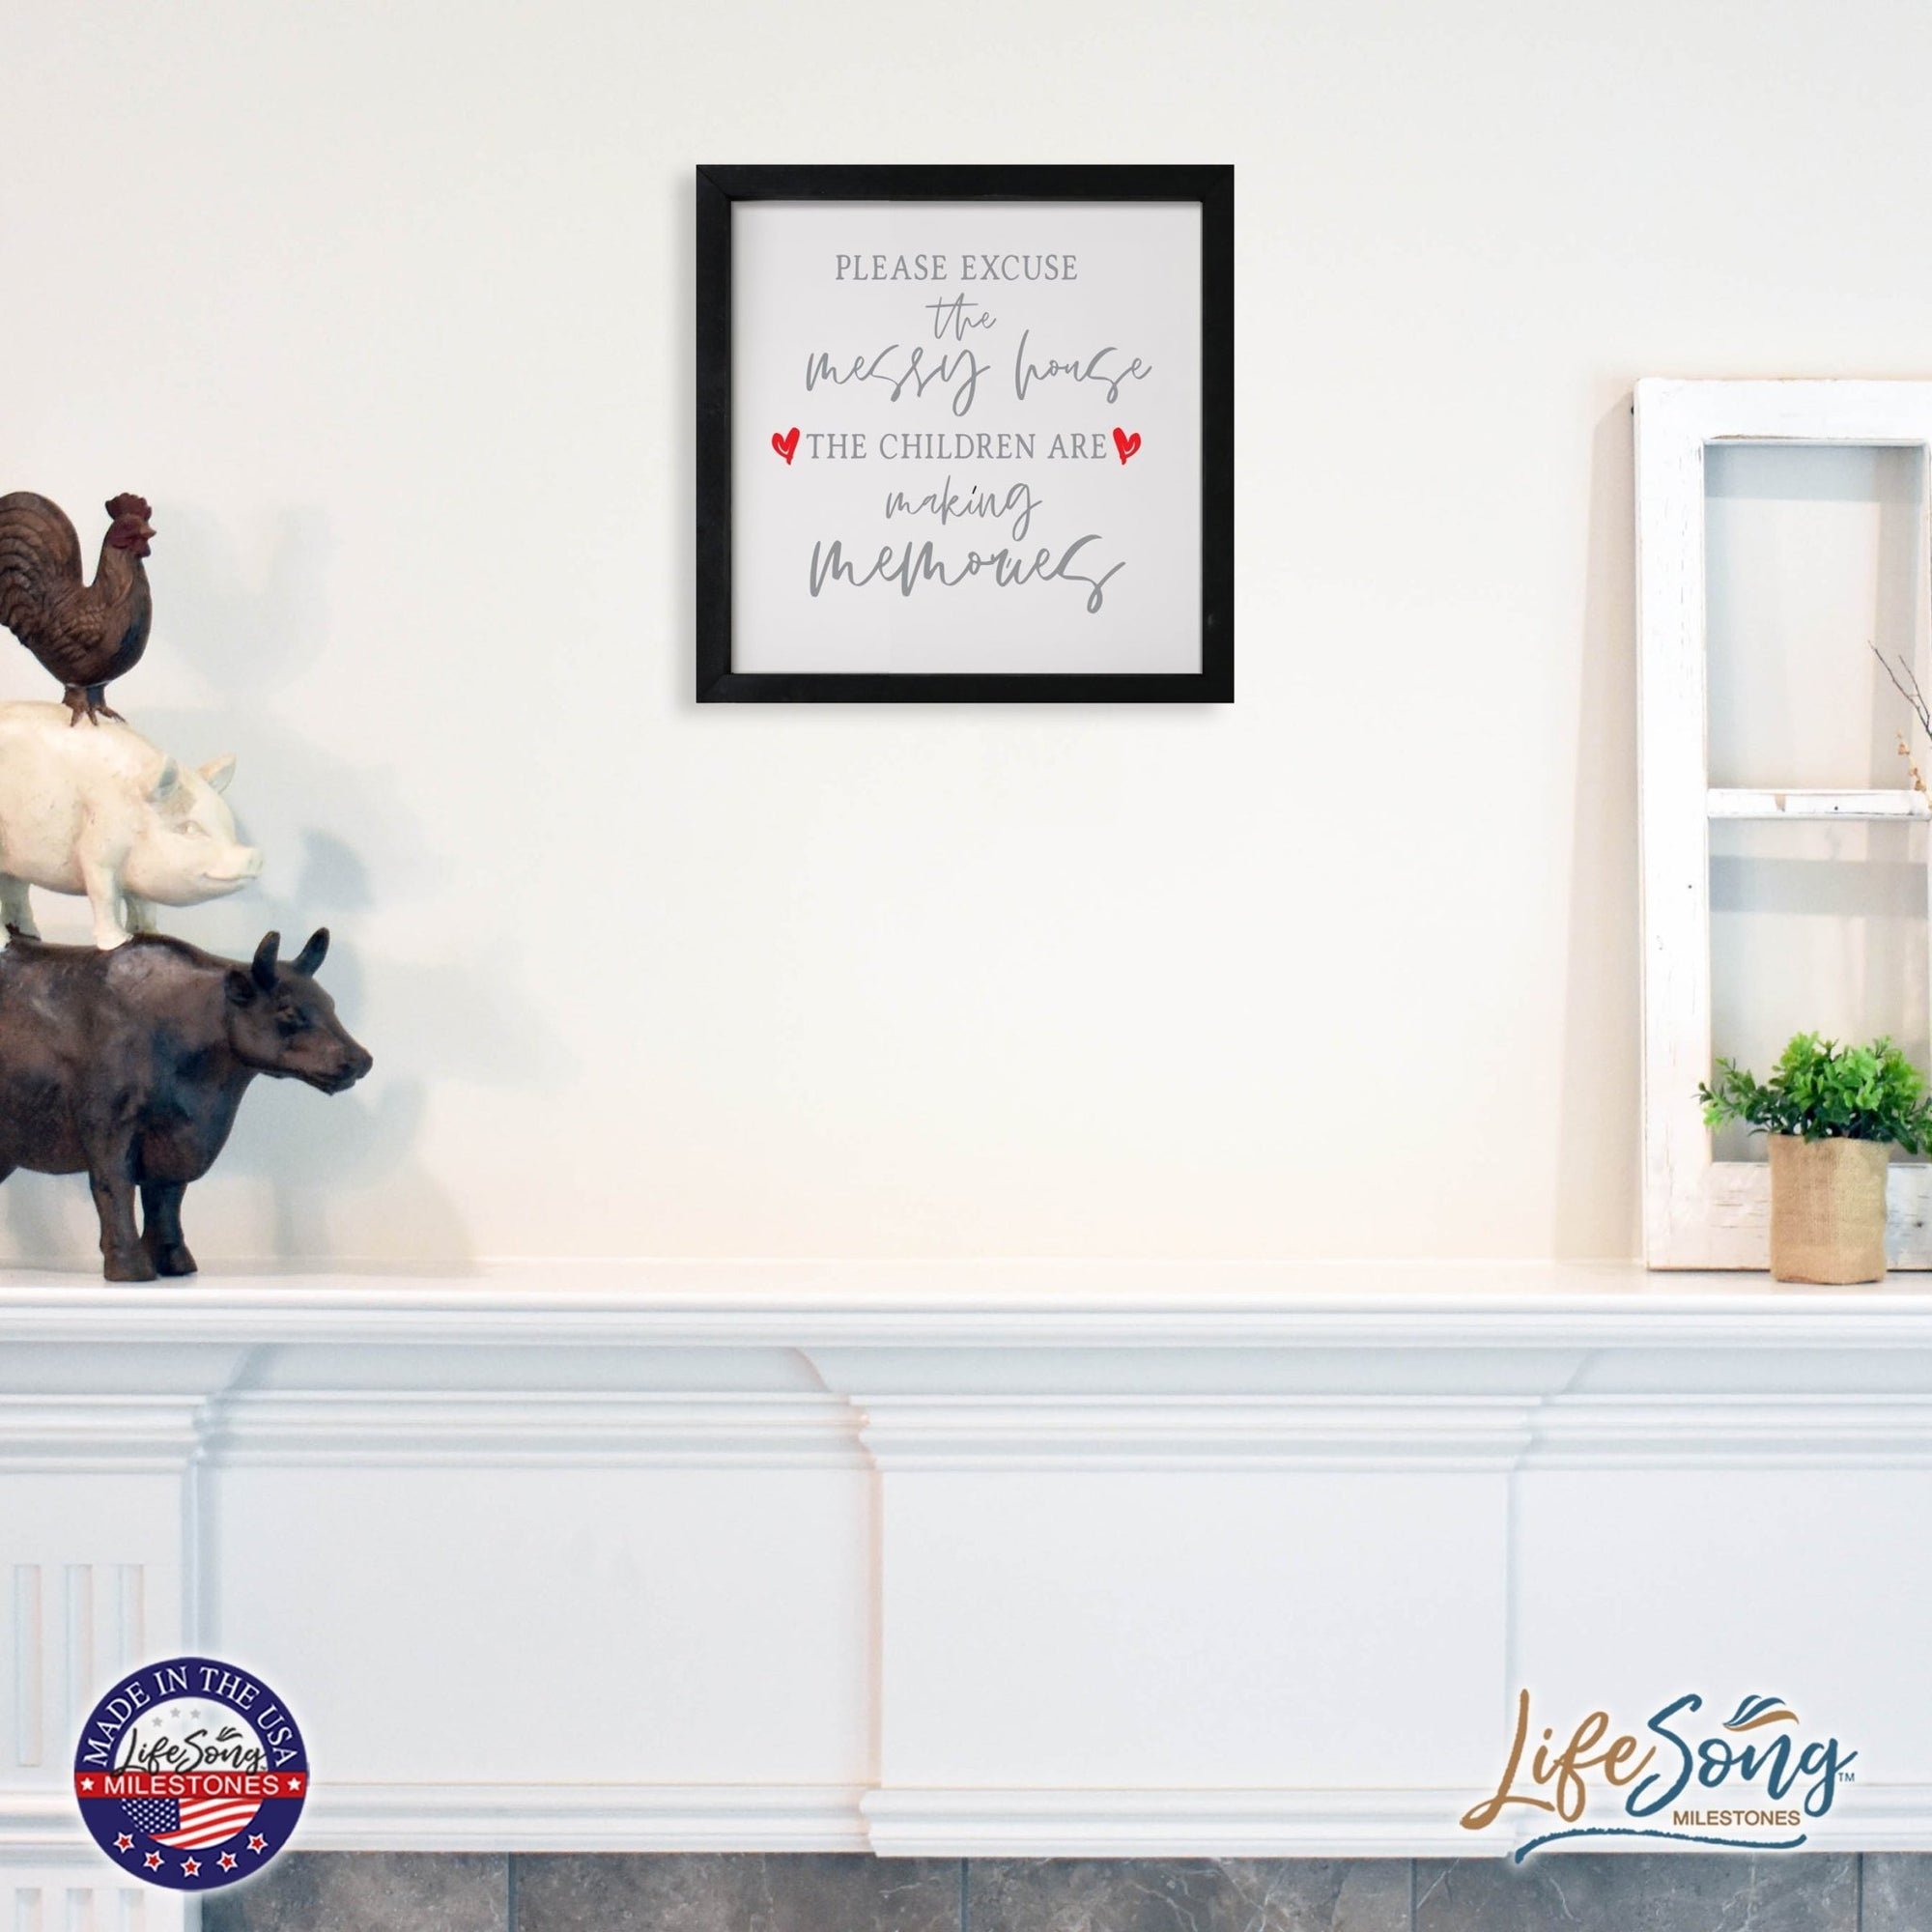 Inspiring Modern Framed Shadow Box 7x7in - Please Excuse The Messy House - LifeSong Milestones